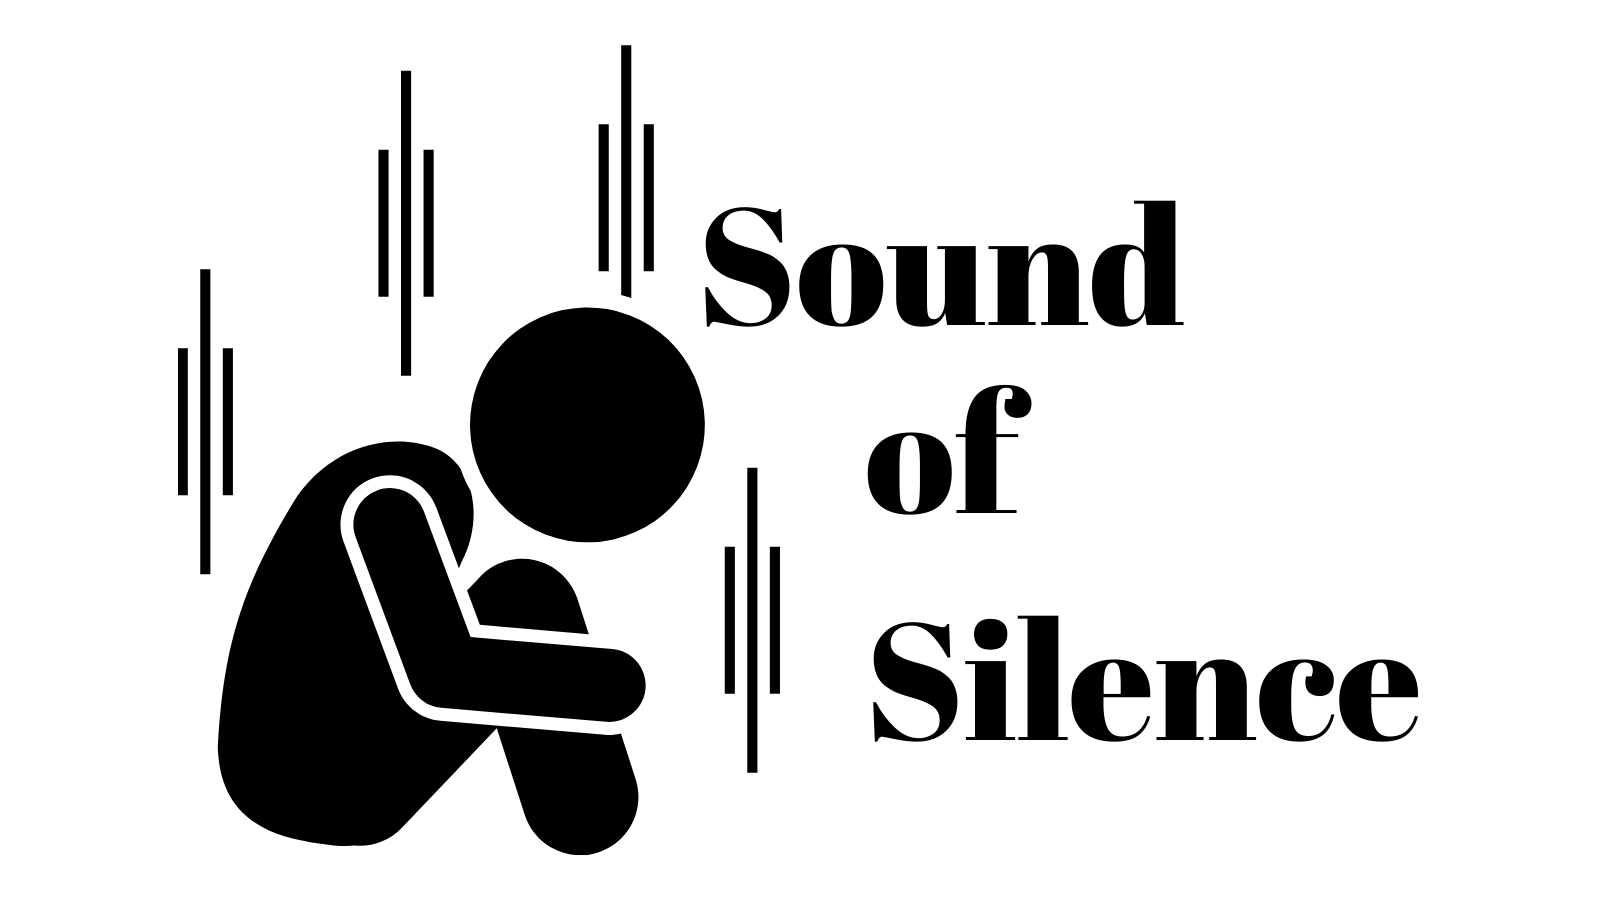 Sound of Silence: Conversation About Mental Health Prevent Substance Misuse